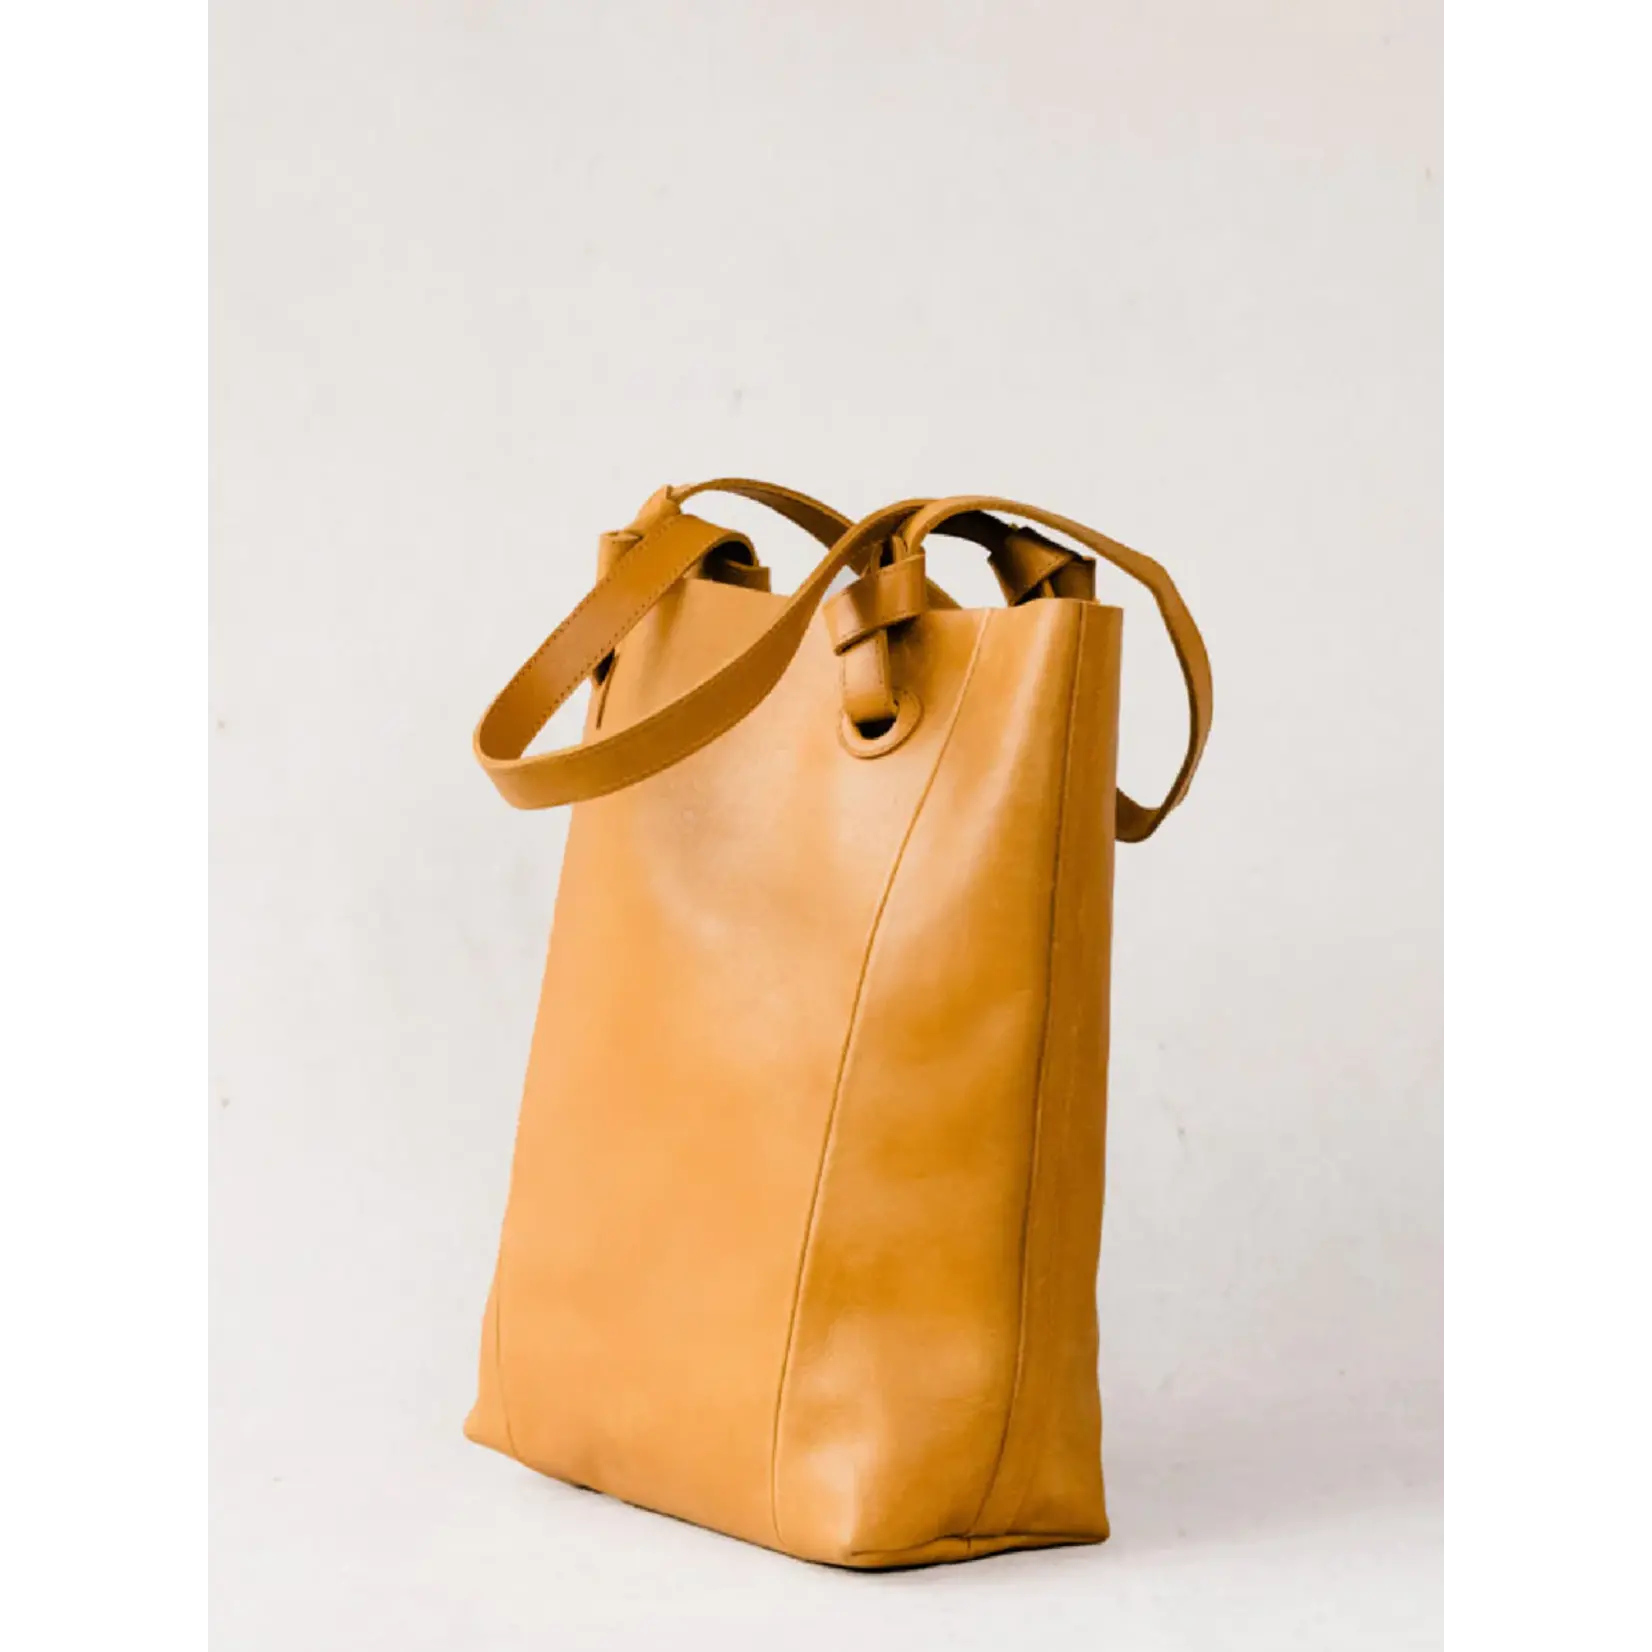 Able Cait Knotted Tote